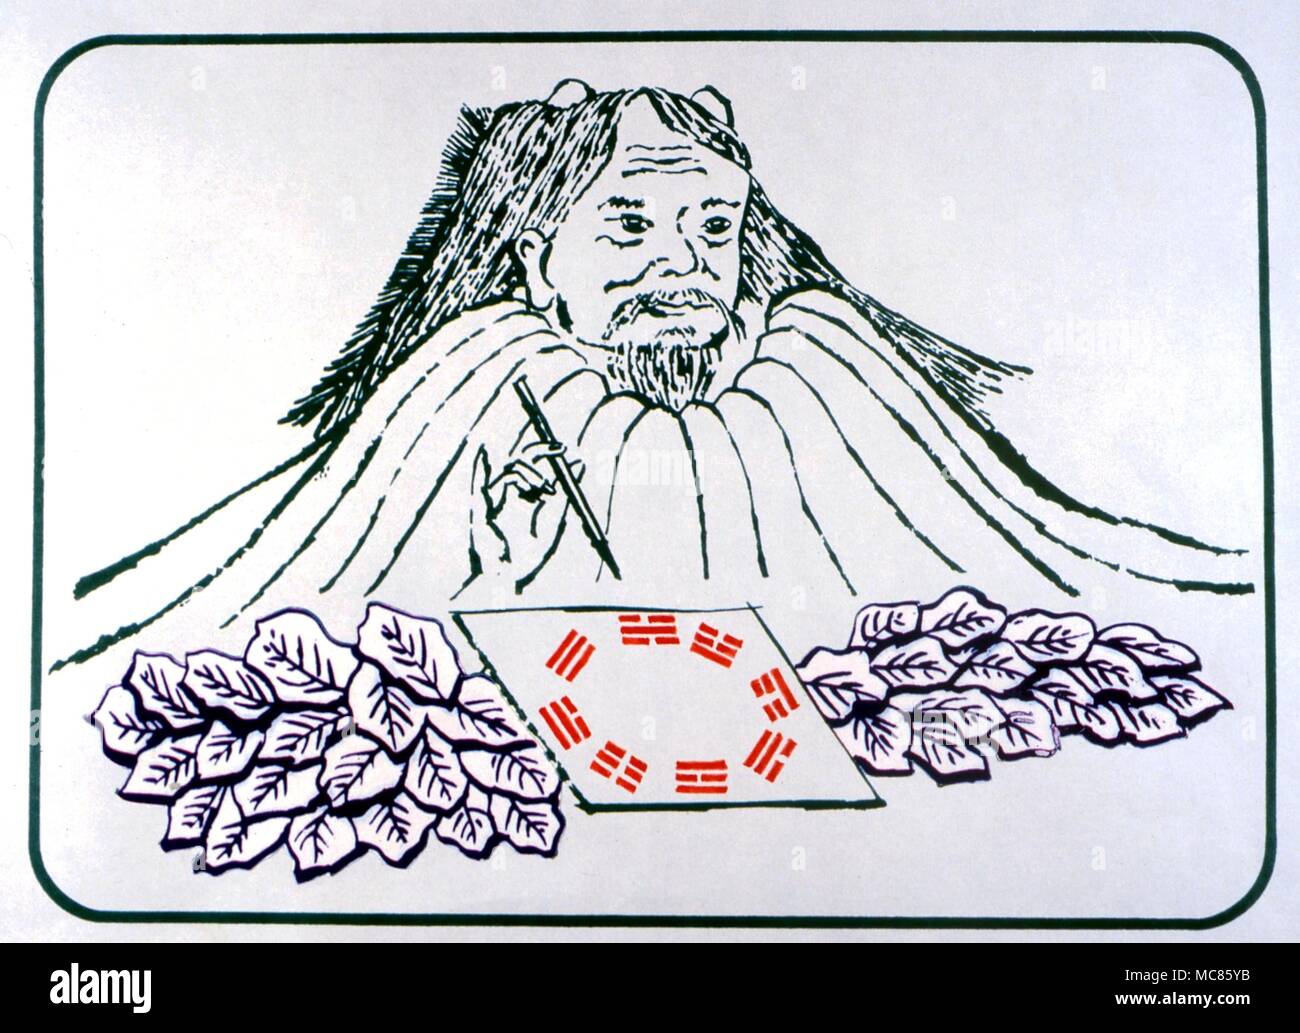 I Ching - Fu Hsi Portrayal of the sage, Fu Hsi, who was said to be the first of the Five legendary Emperors (to 2838BC), and is supposed to have invented the eight trigrams of the I Ching system Stock Photo